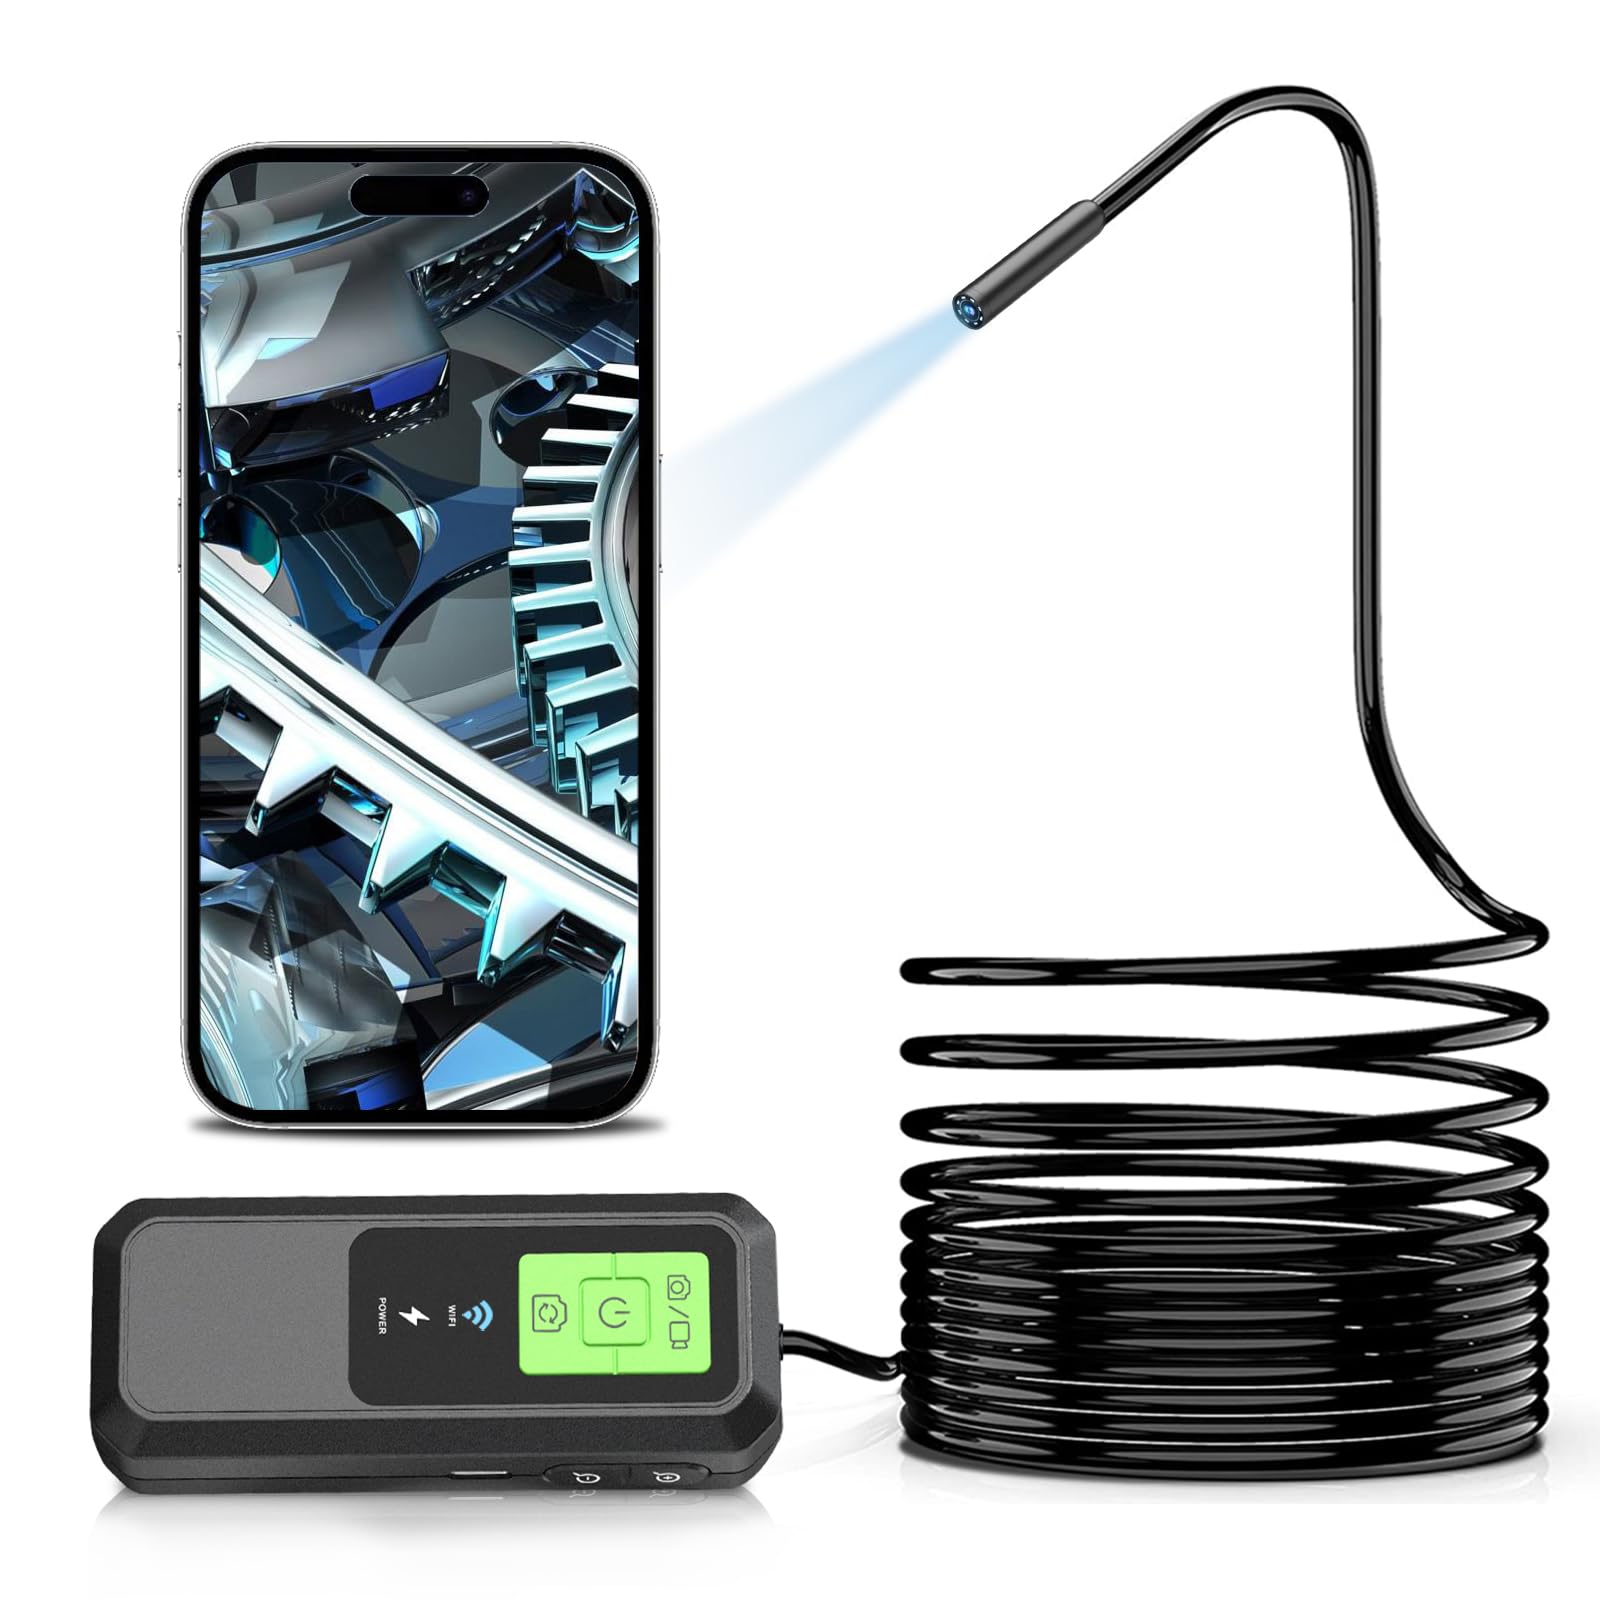 T Takmly USB Endoscope for OTG Android Phone, Computer, 5.5 mm Borescope Inspection Snake Camera Waterproof with USB, Type C, 16.4ft Semi-Rigid Cord